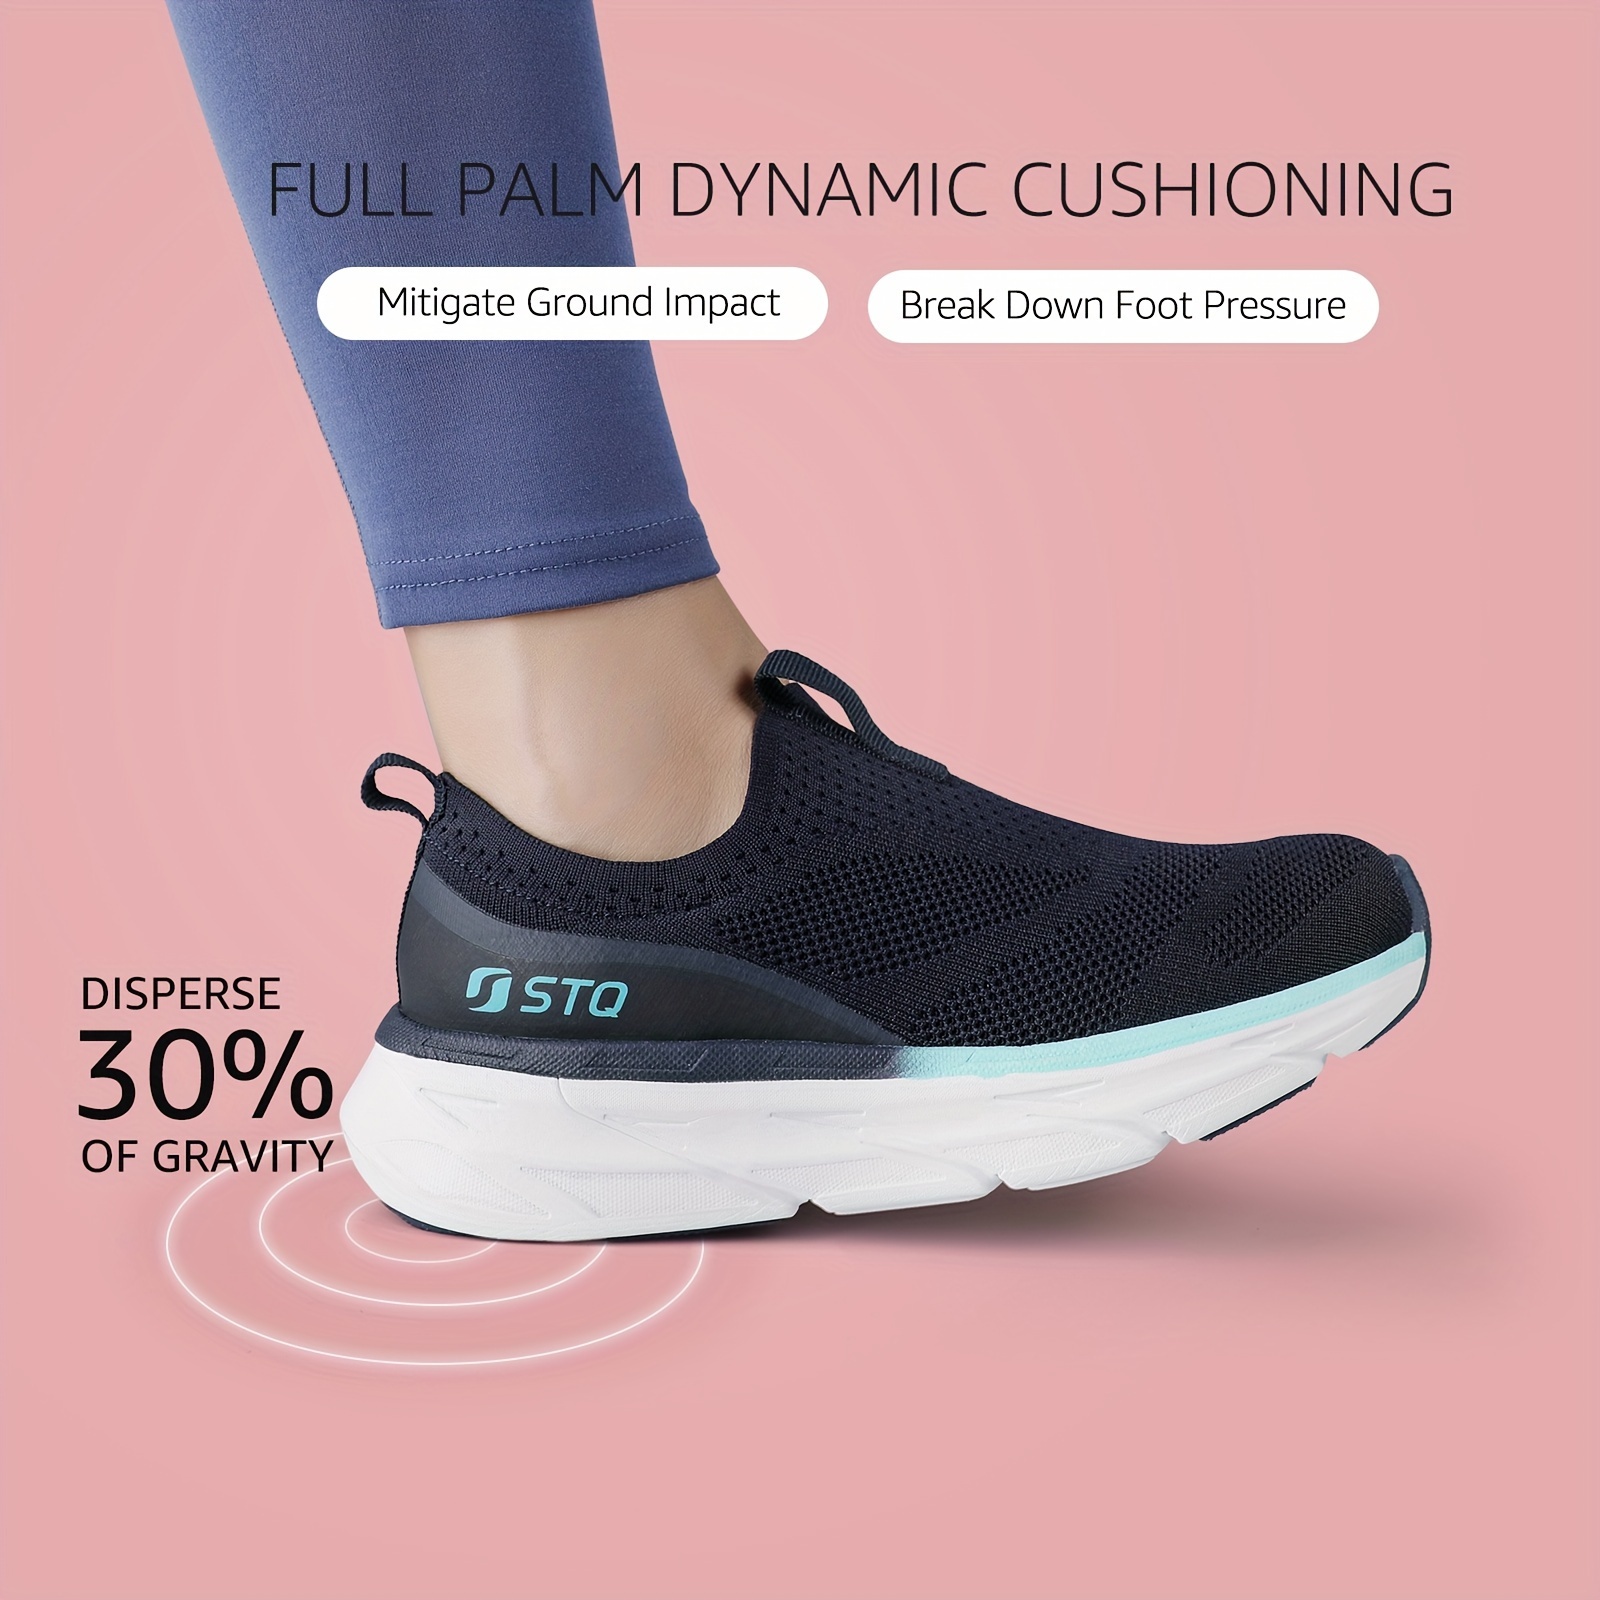 

Women's Slip-on Walking Sneakers With Arch Support, Comfortable Breathable Fabric Material, Versatile Athletic Shoes For Daily Wear